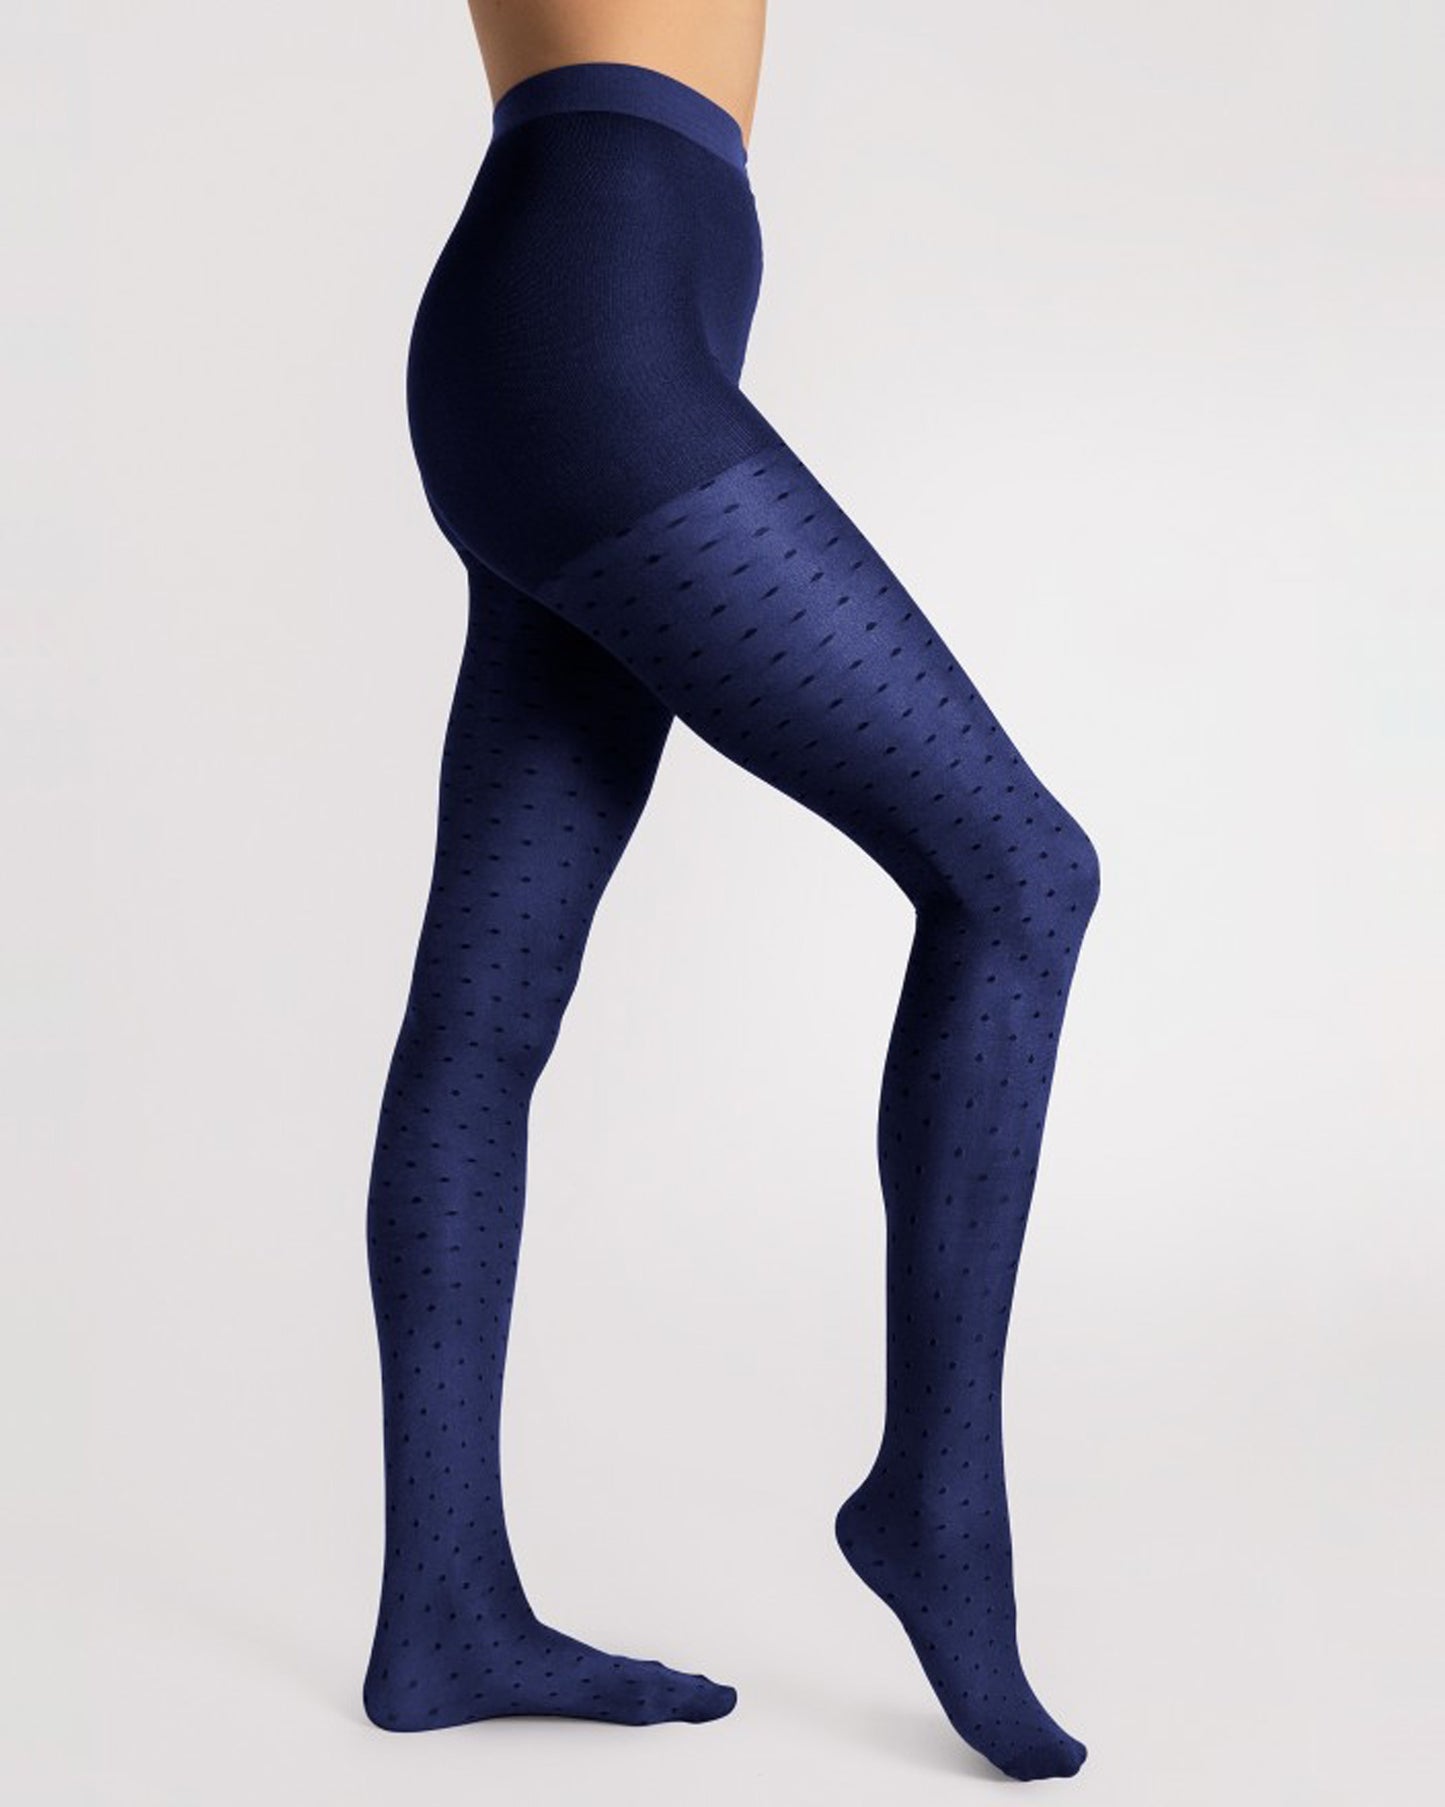 Fiore Dry Pastel Tights - Glossy navy opaque fashion tights with an all over light honeycomb and spot pattern in black.